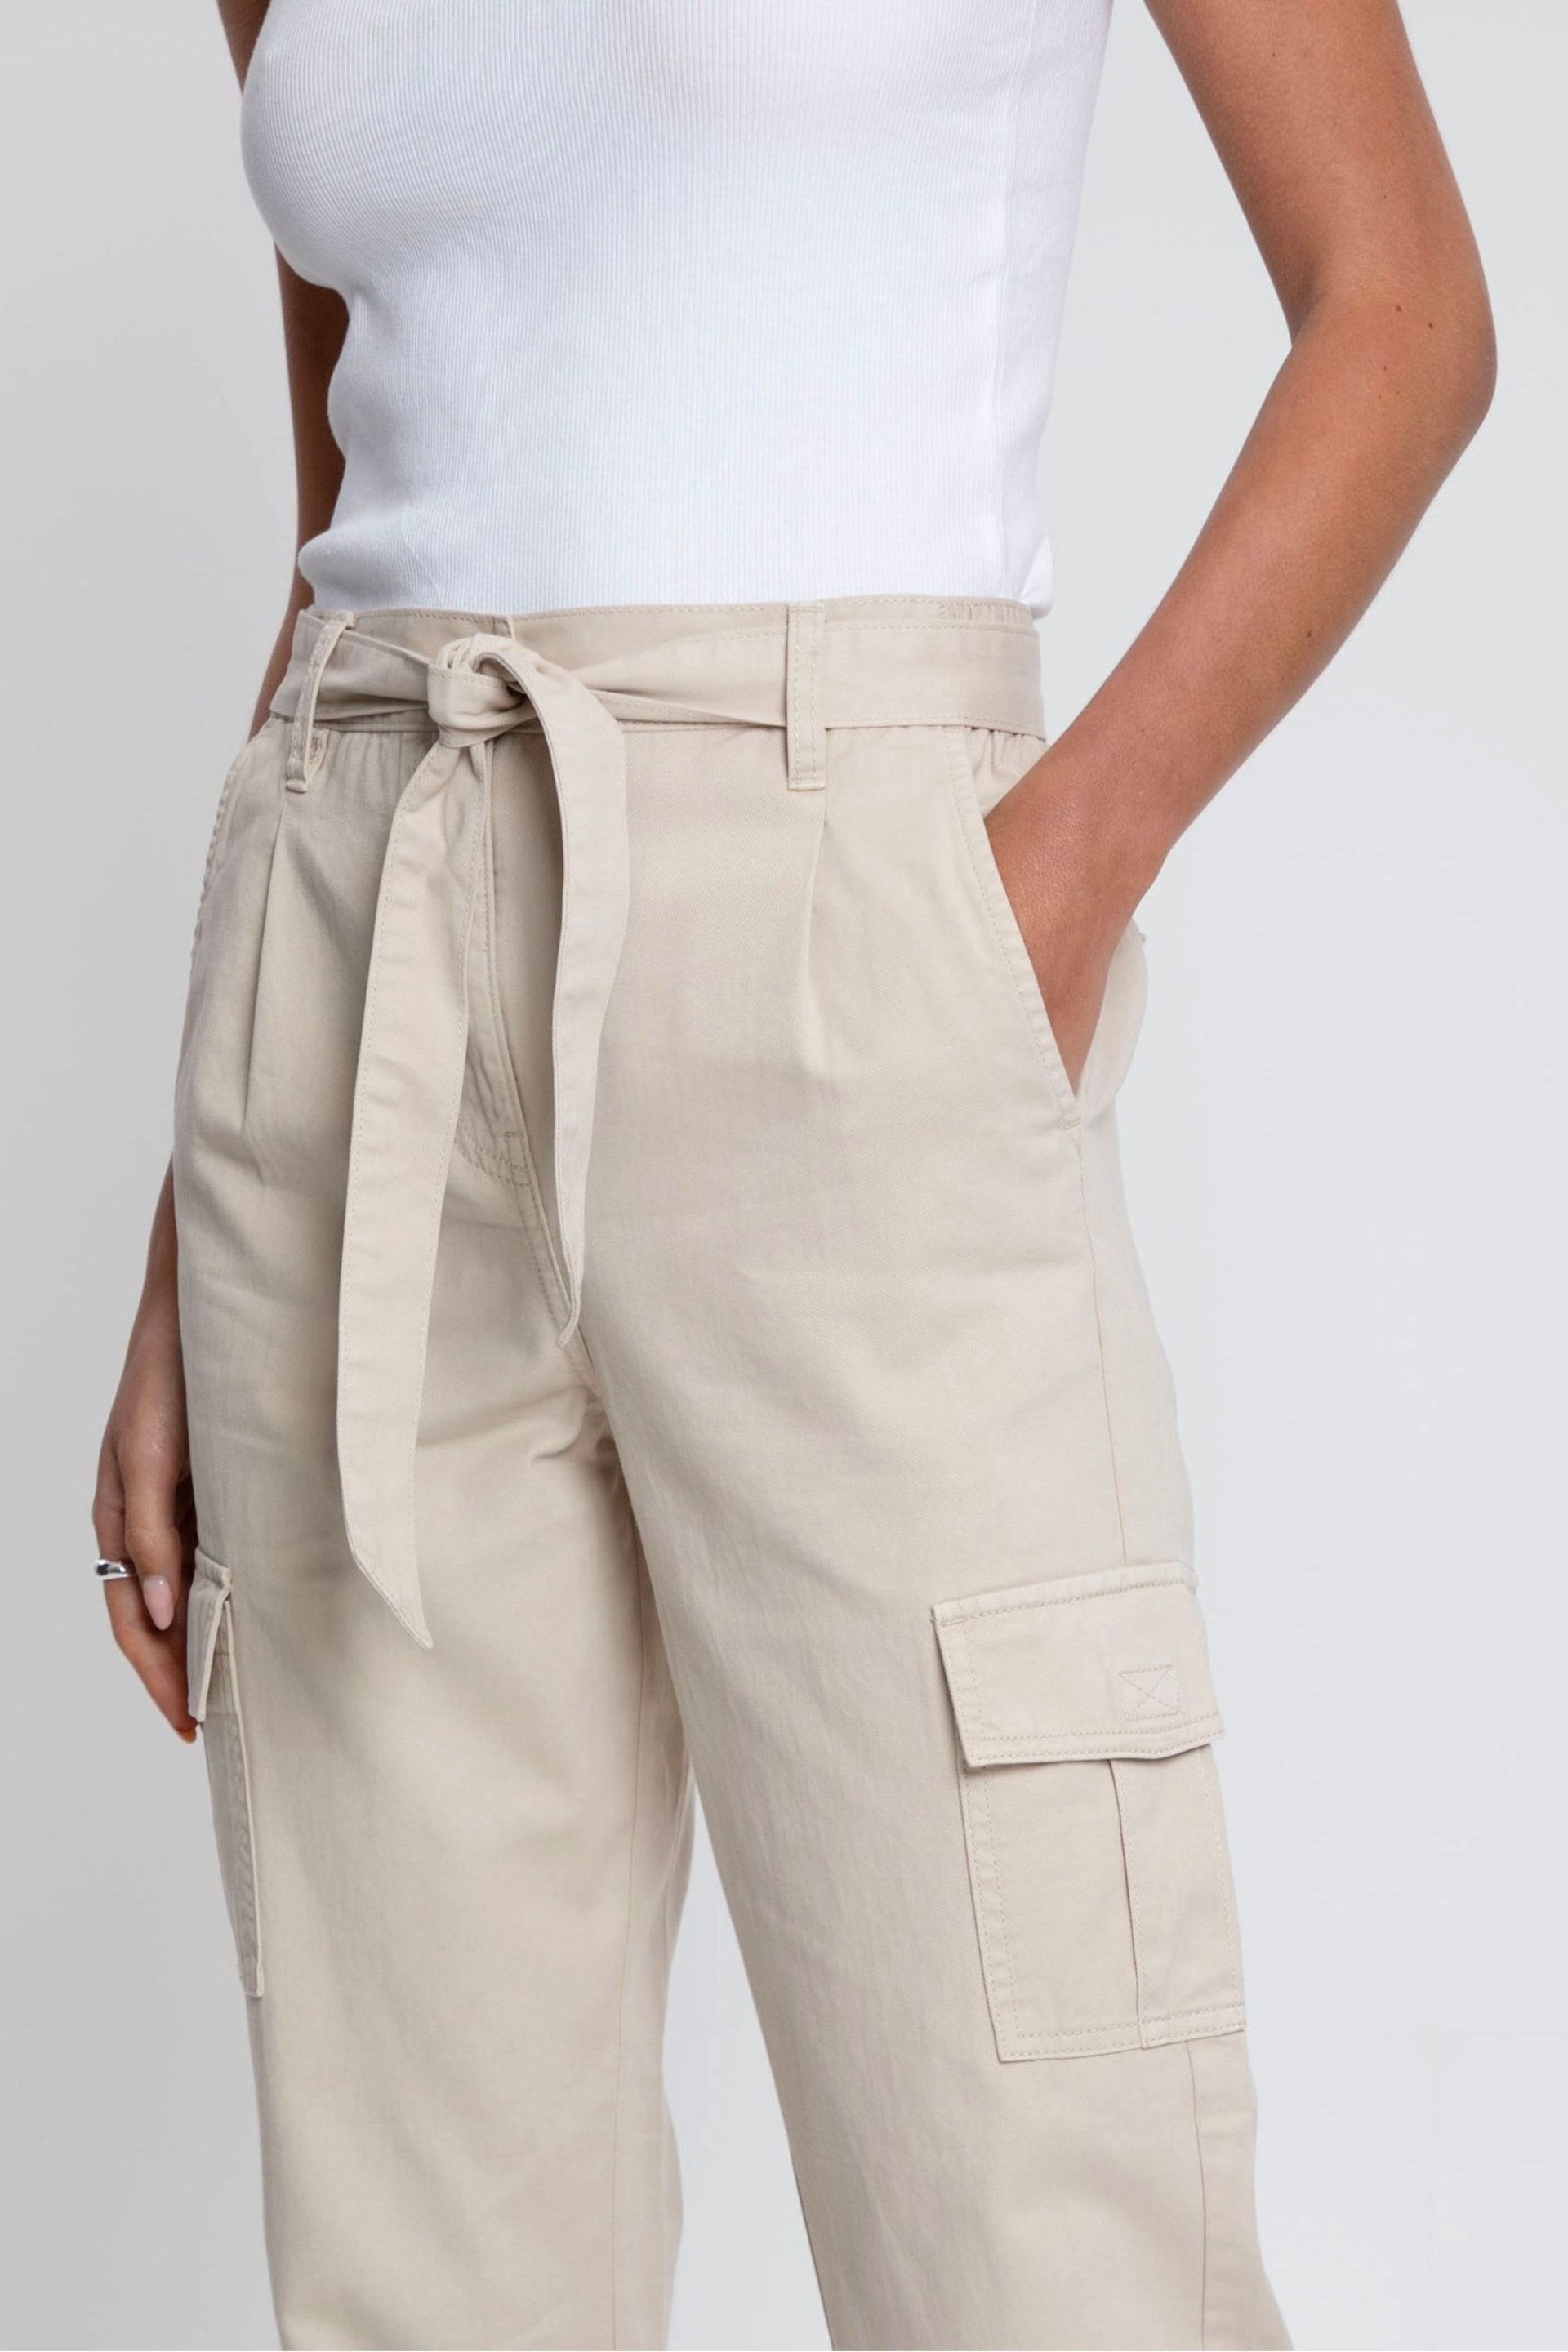 Threadbare Natural Cargo Utility Straight Leg Belted Trousers - Image 4 of 4